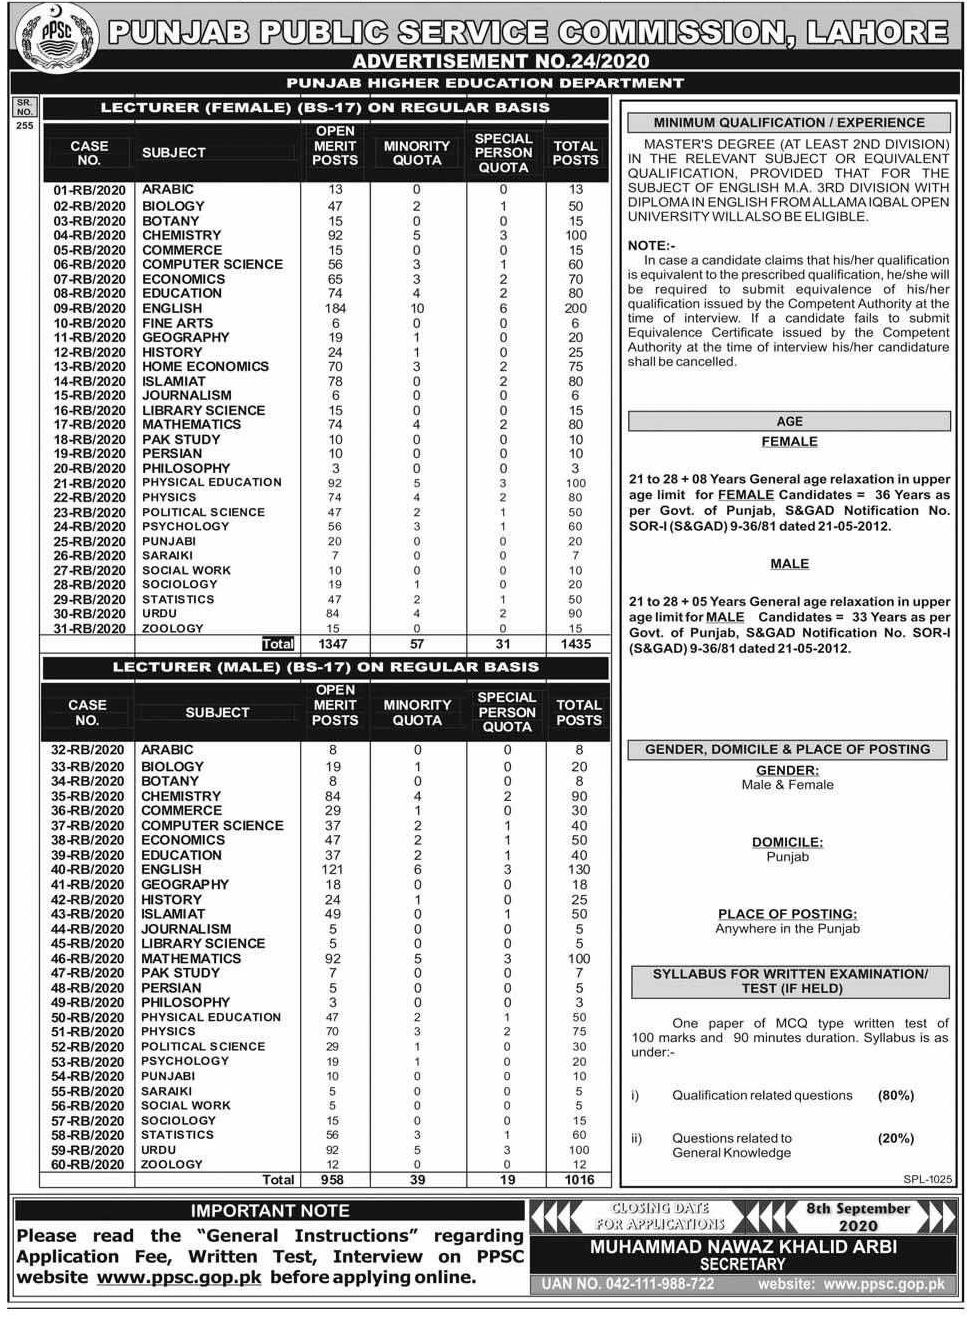 Vacancies of Lecturers 2020 in Government Colleges in Punjab through PPSC